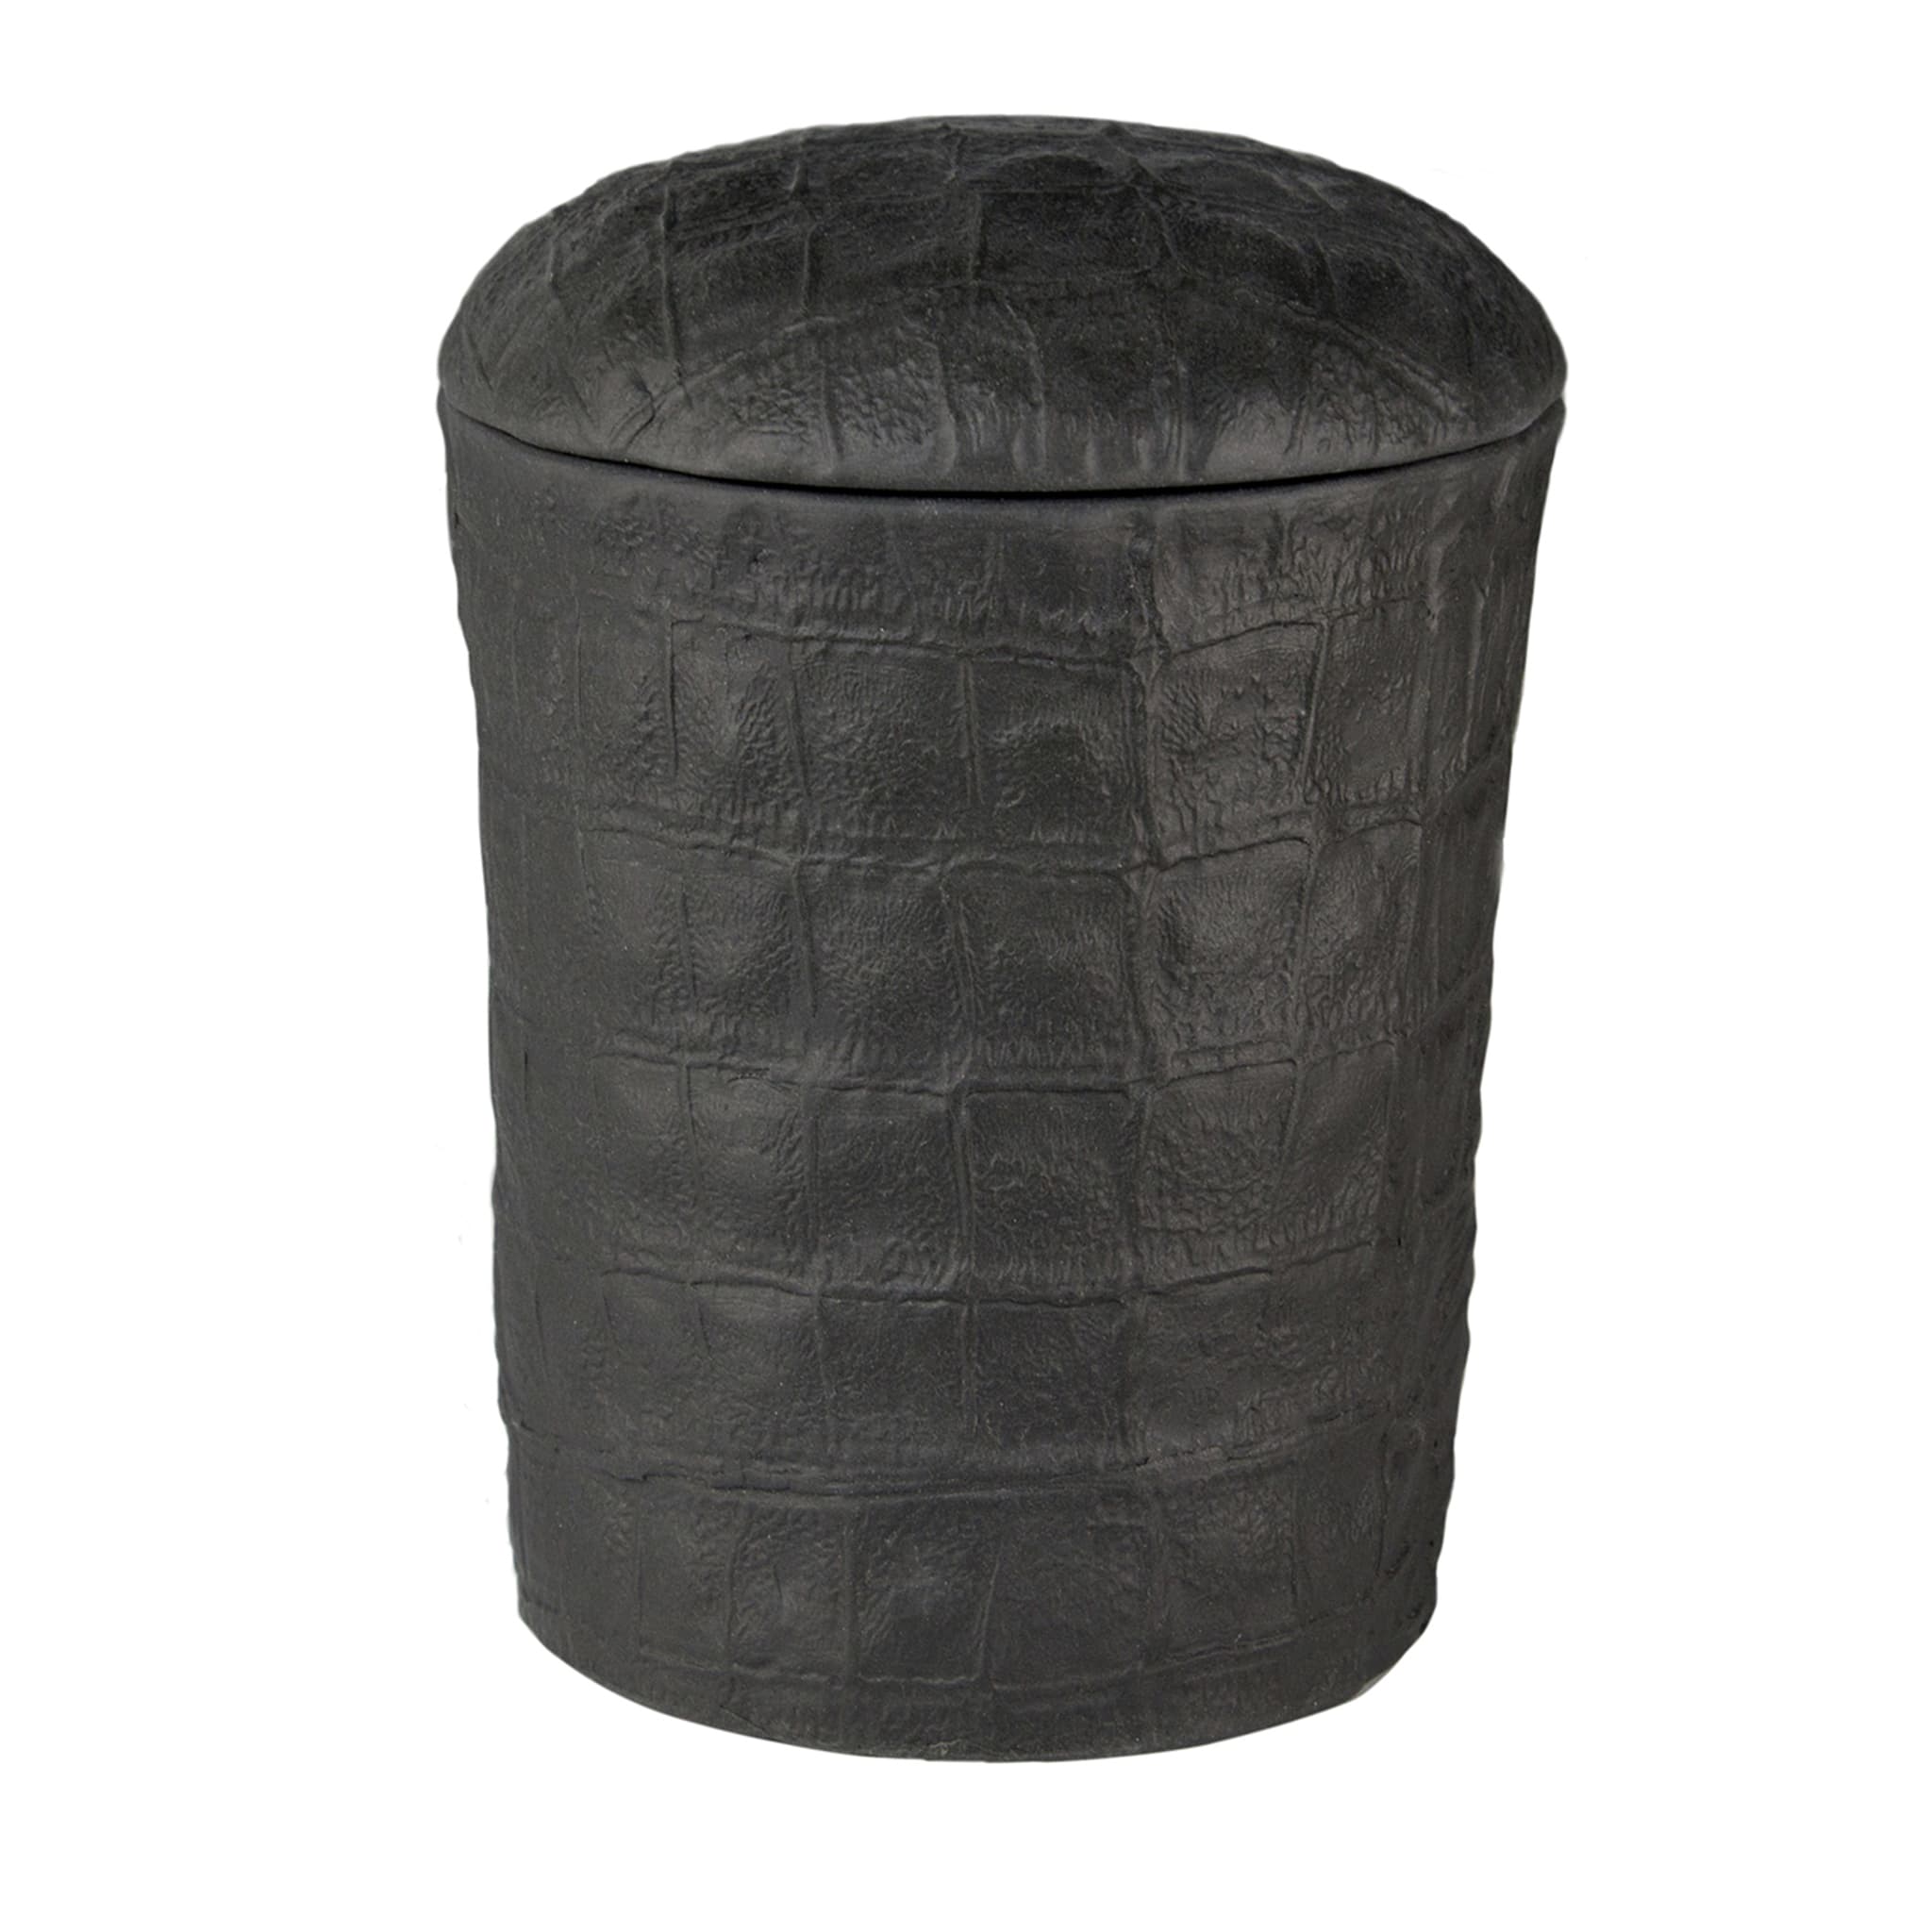 COCCO CANISTER - BLACK OPAQUE - Main view